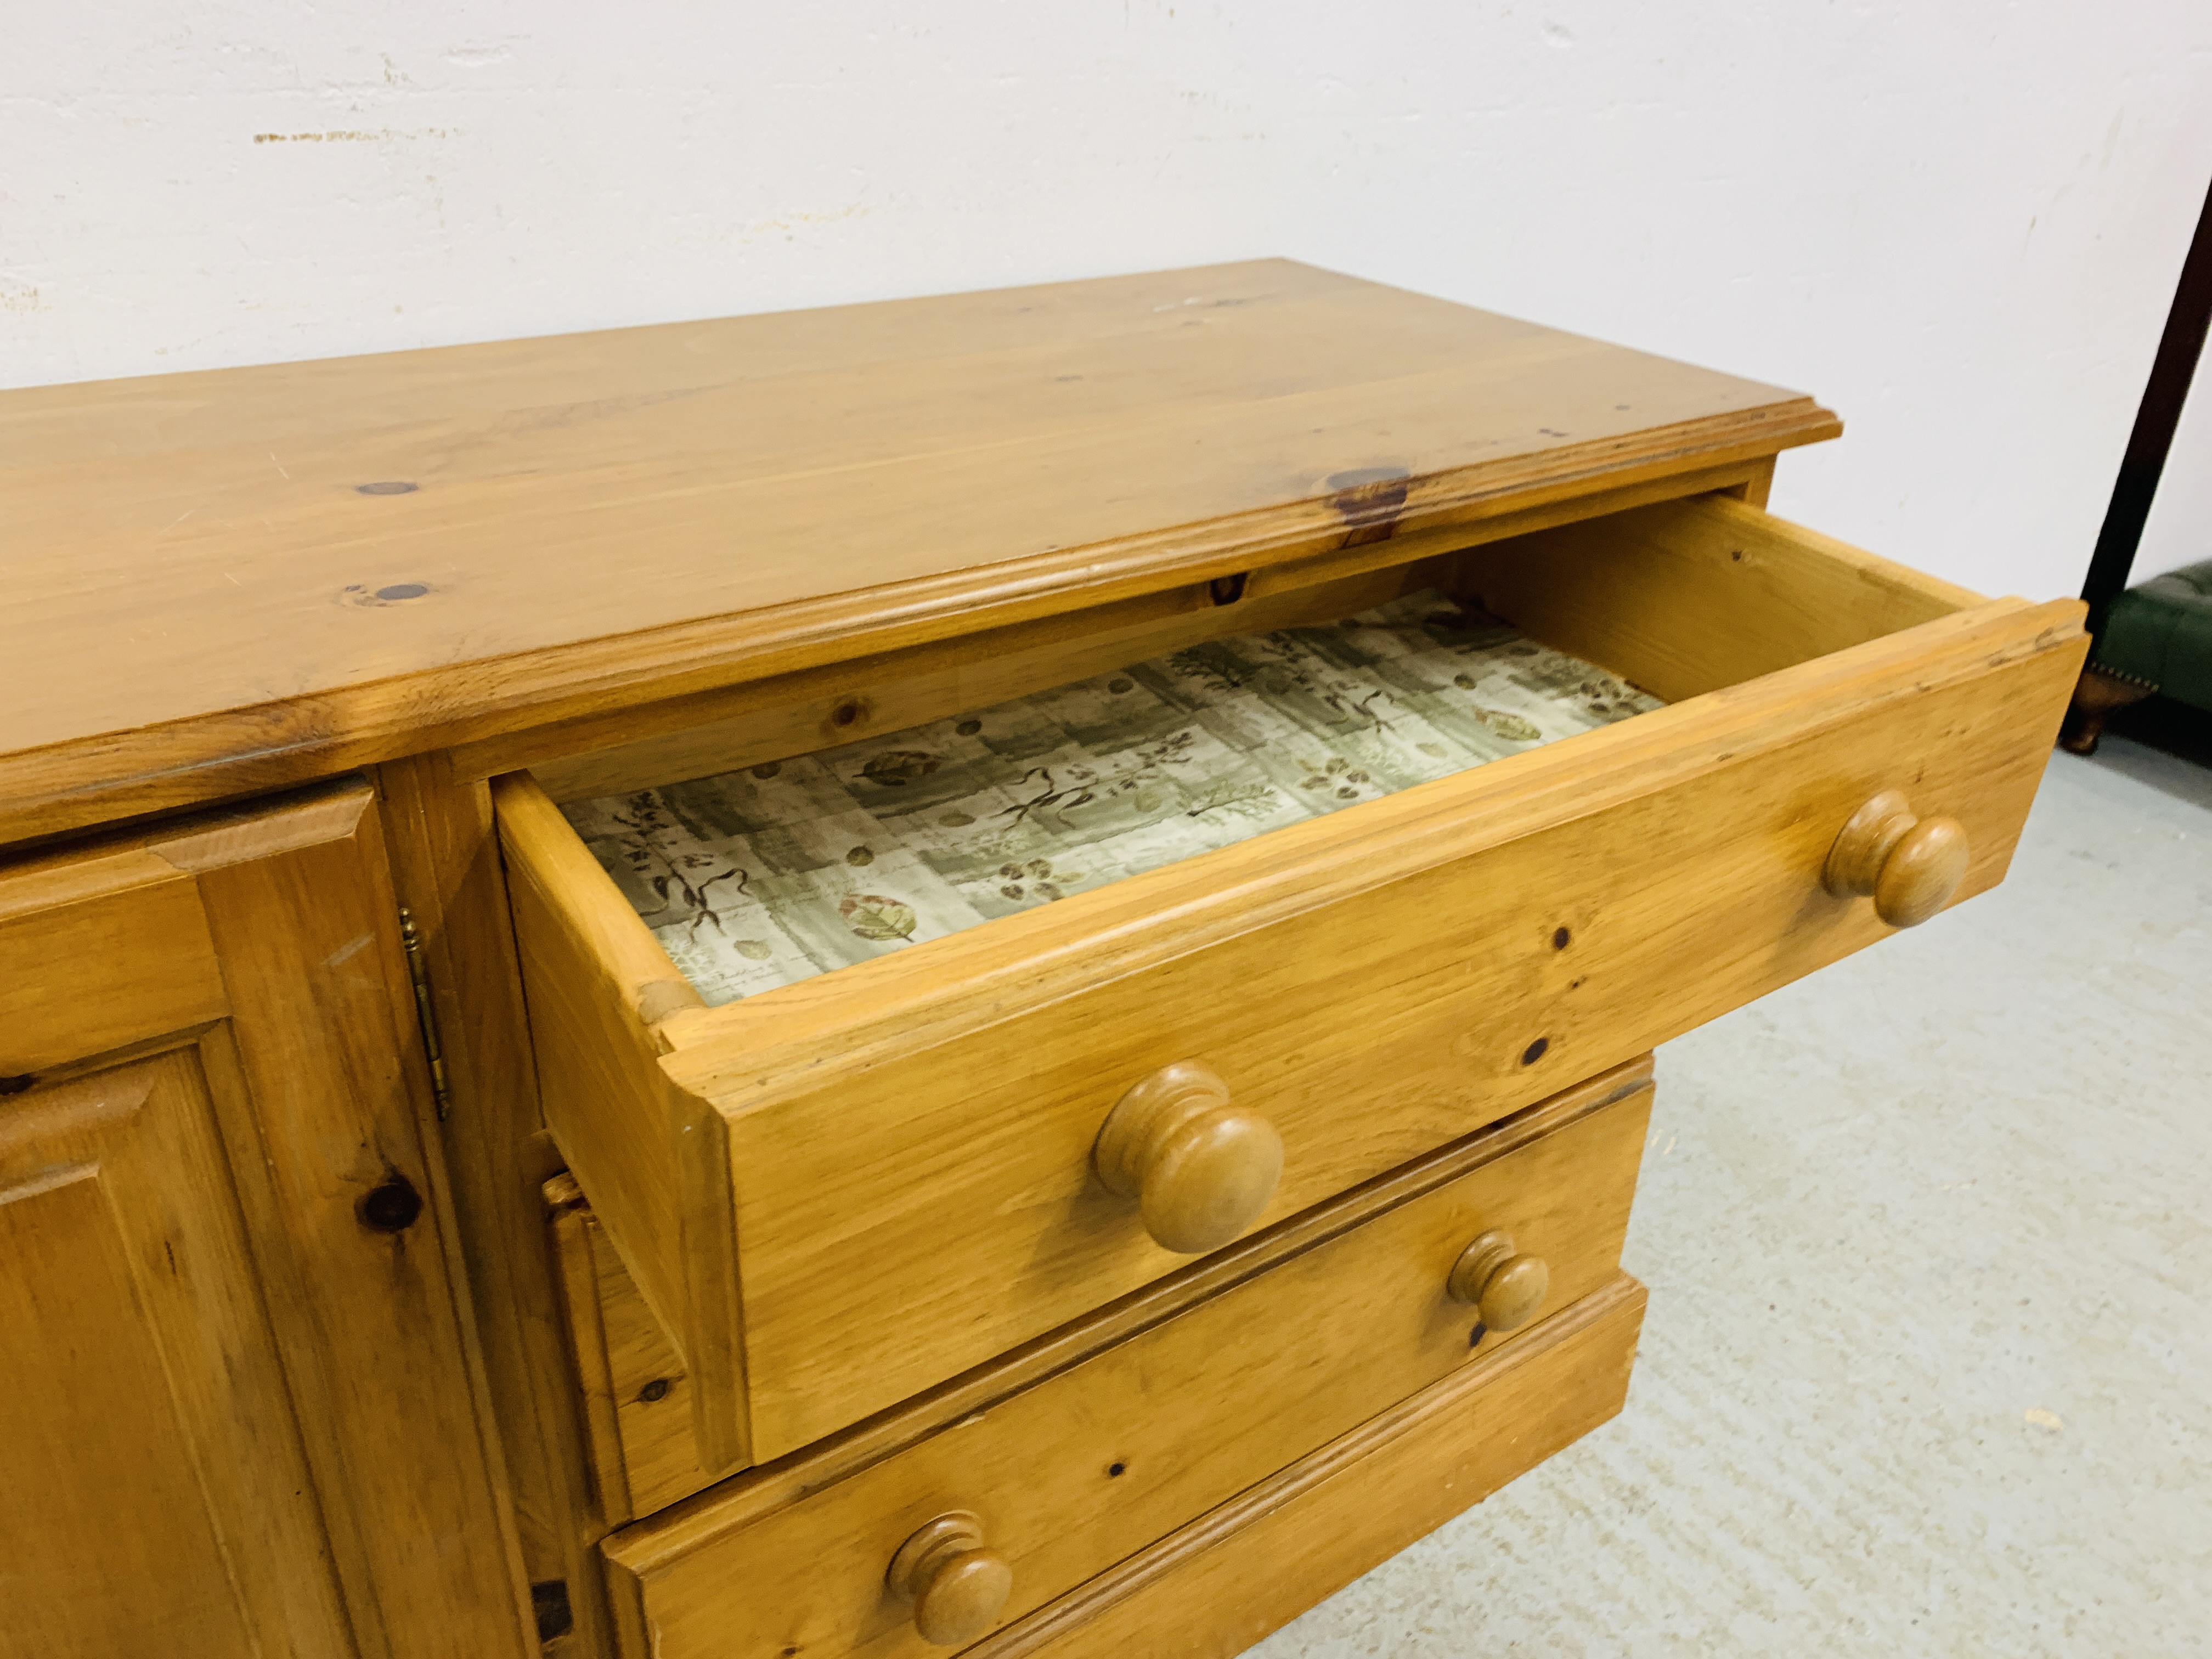 A SOLID HONEY PINE THREE DRAWER DRESSER BASE WITH CABINET TO ONE END - W 130CM. D 41CM. H 66CM. - Image 9 of 9